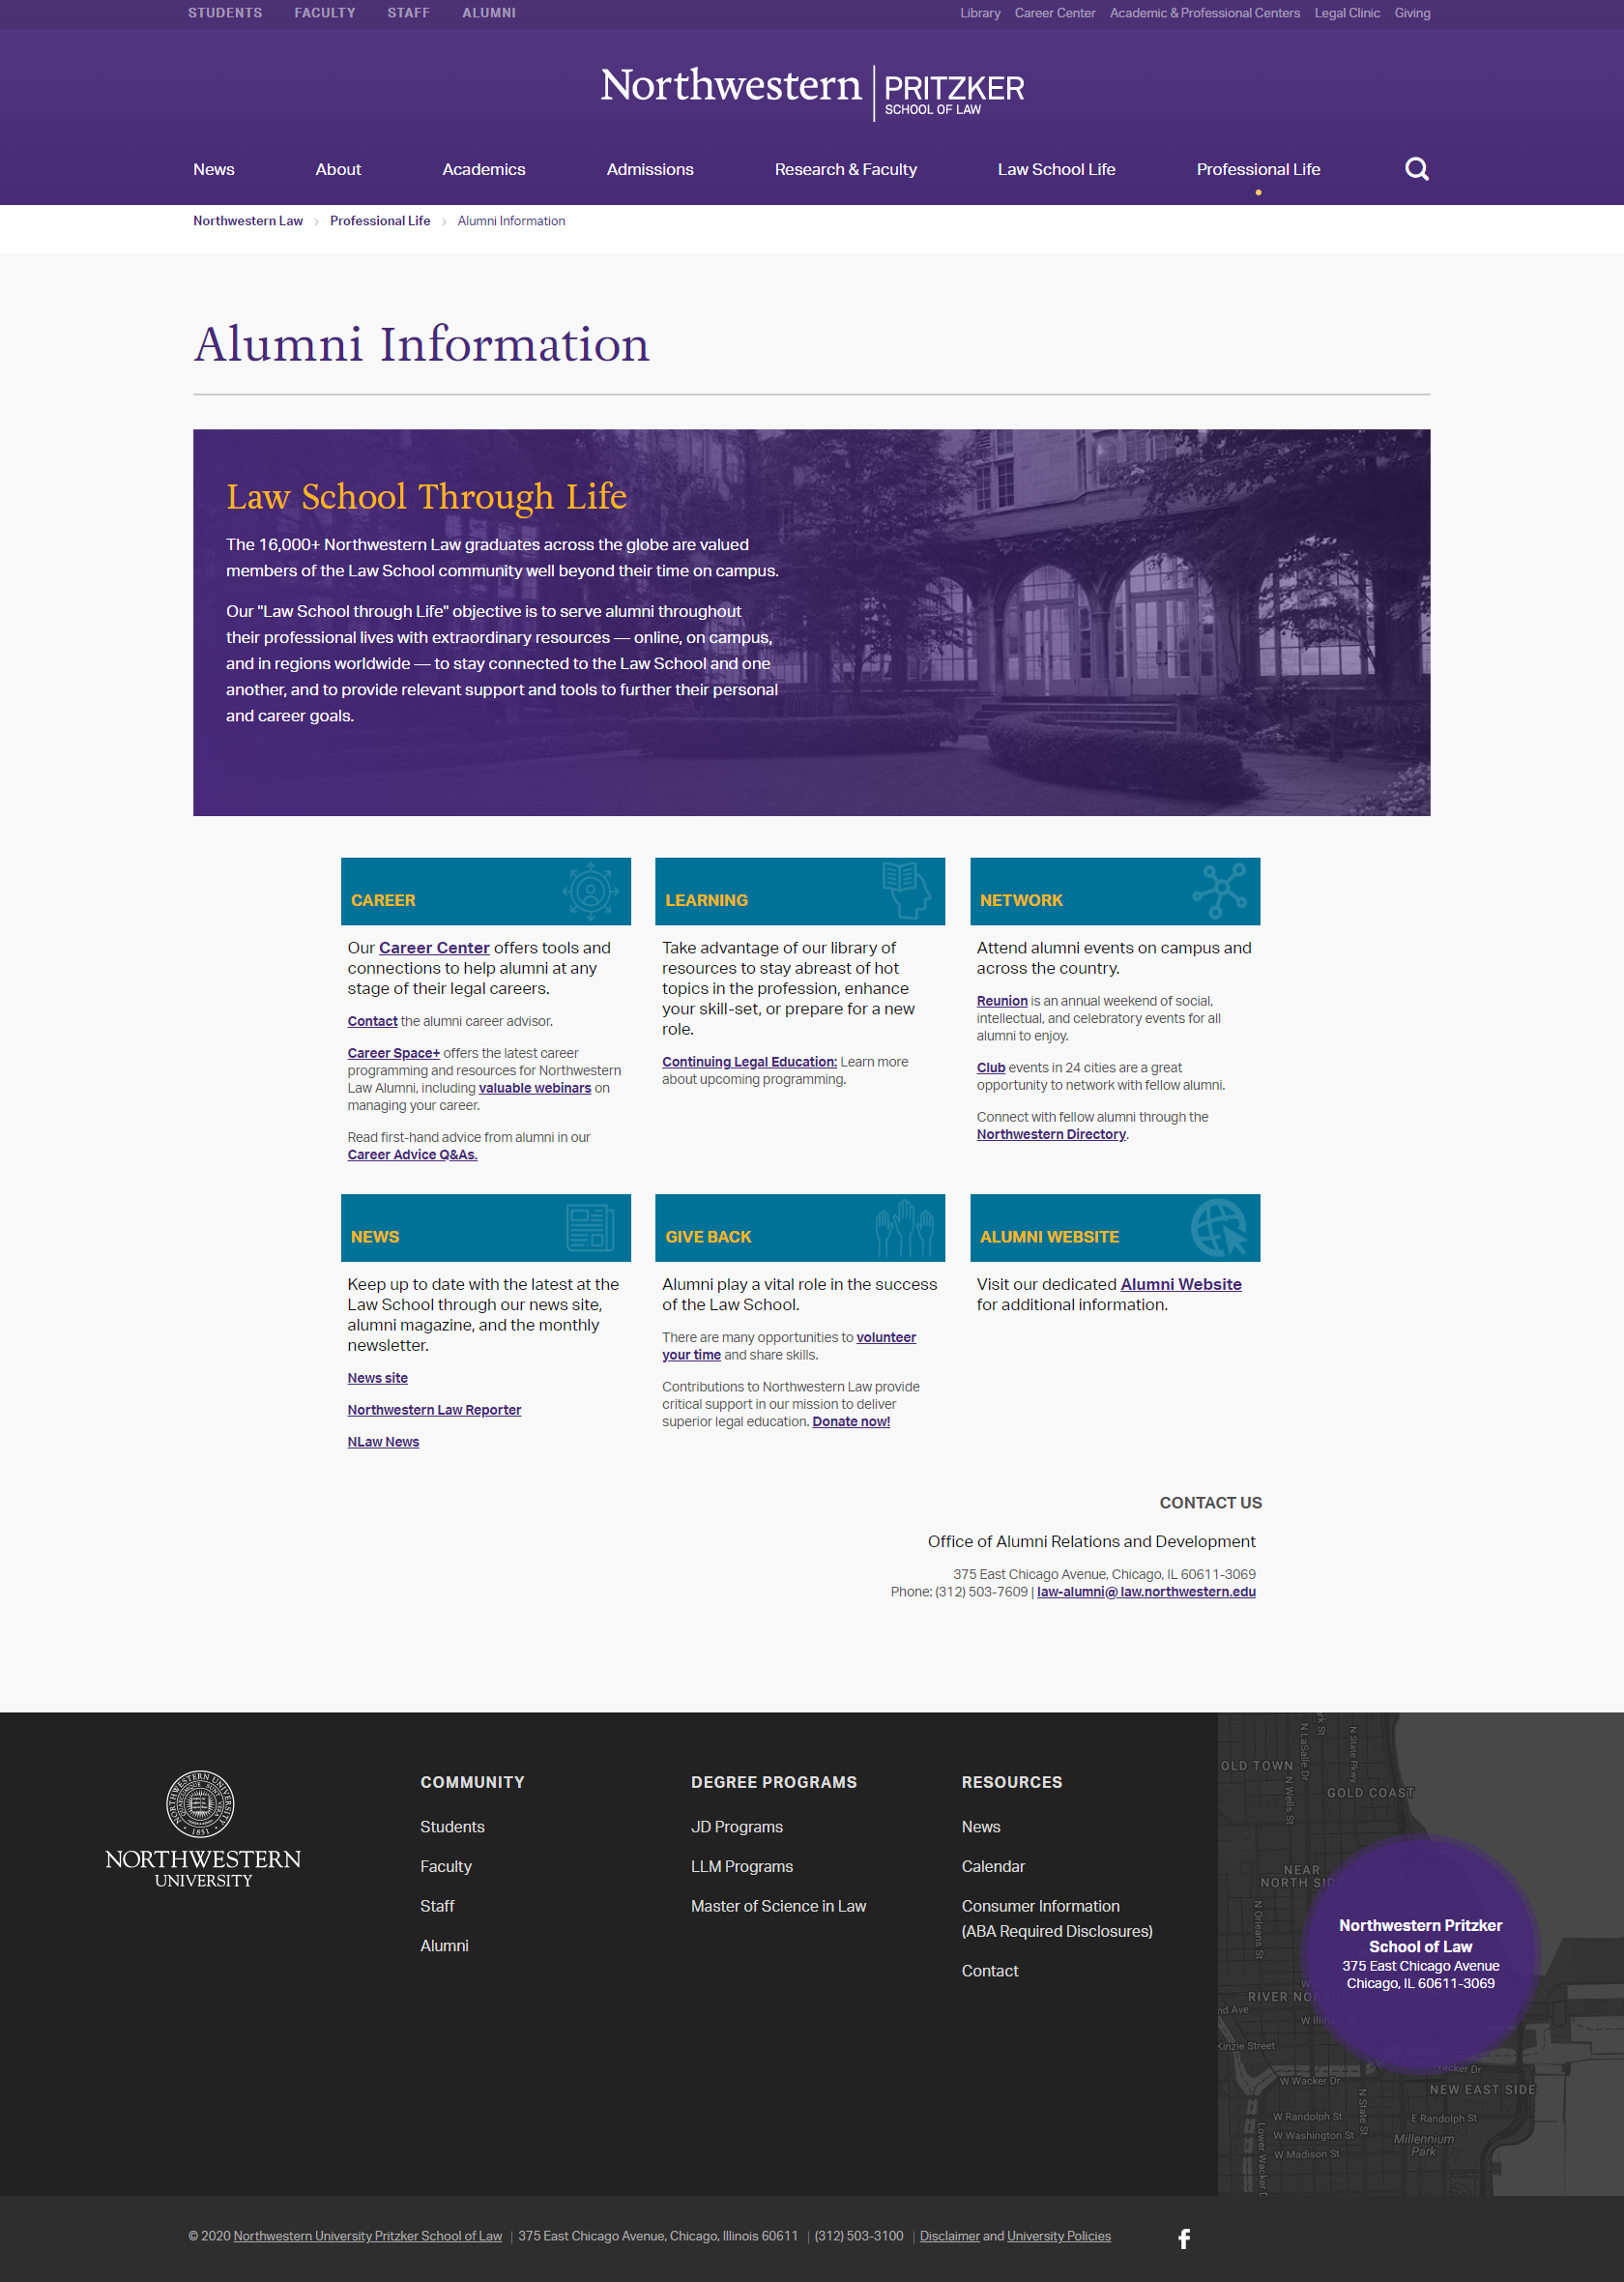 A screenshot of the Alumni Portal after being redesigned.